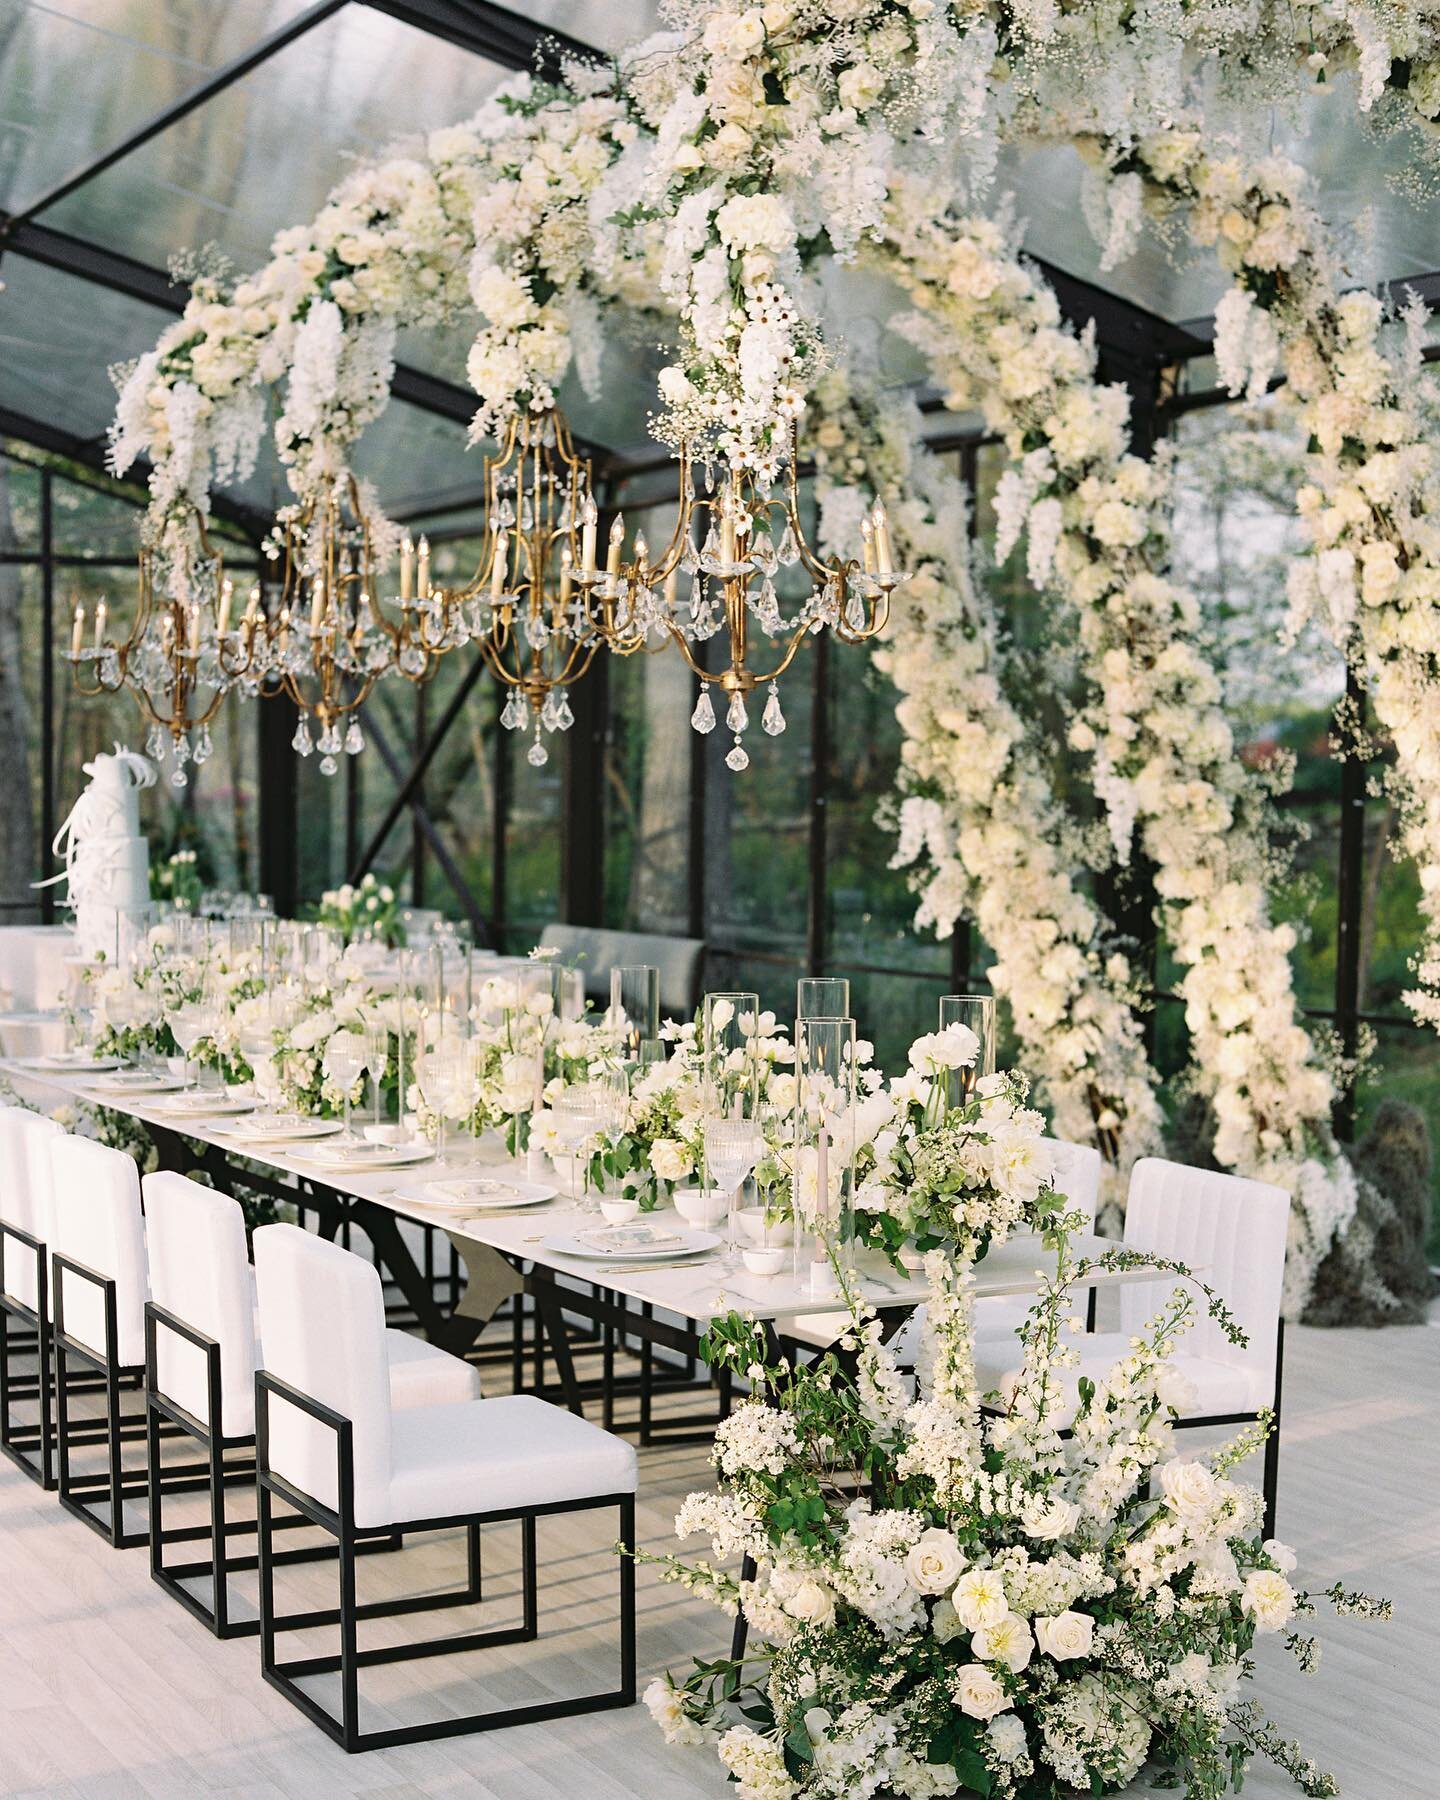 Overflowing florals and statement chandeliers made this glass-tented wedding reception truly glow! 🤍✨

Floral: @sophiefelts 
Planning and Design: @lpe_francie @laurynprattes 
Venue: @goodstoneinn 
Tent: @sandoneproductions 
Photography: @abbyjiu @me